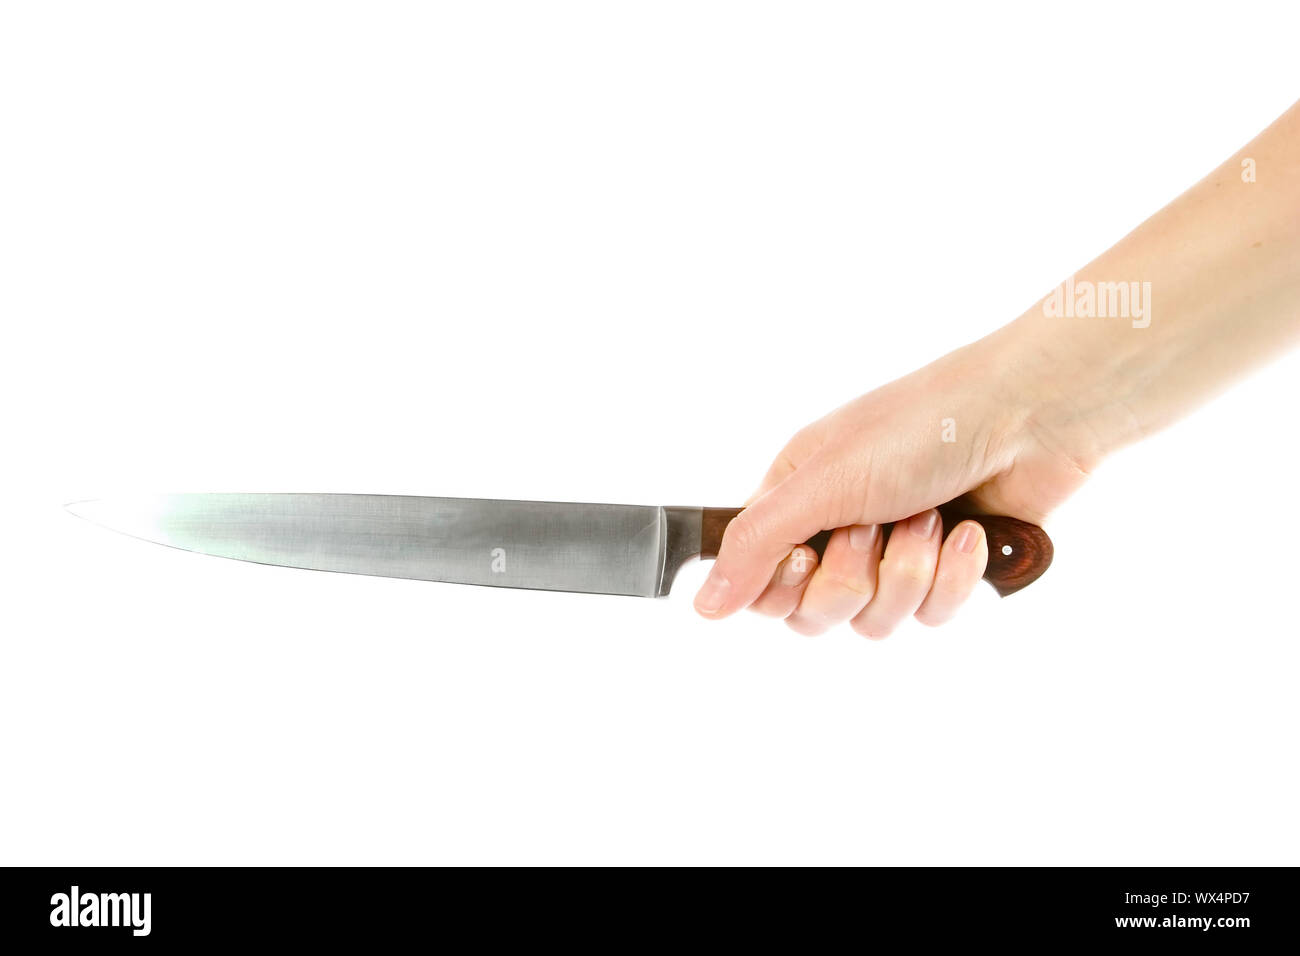 A hand holding a large butcher knife isolated on white with clipping path. Stock Photo